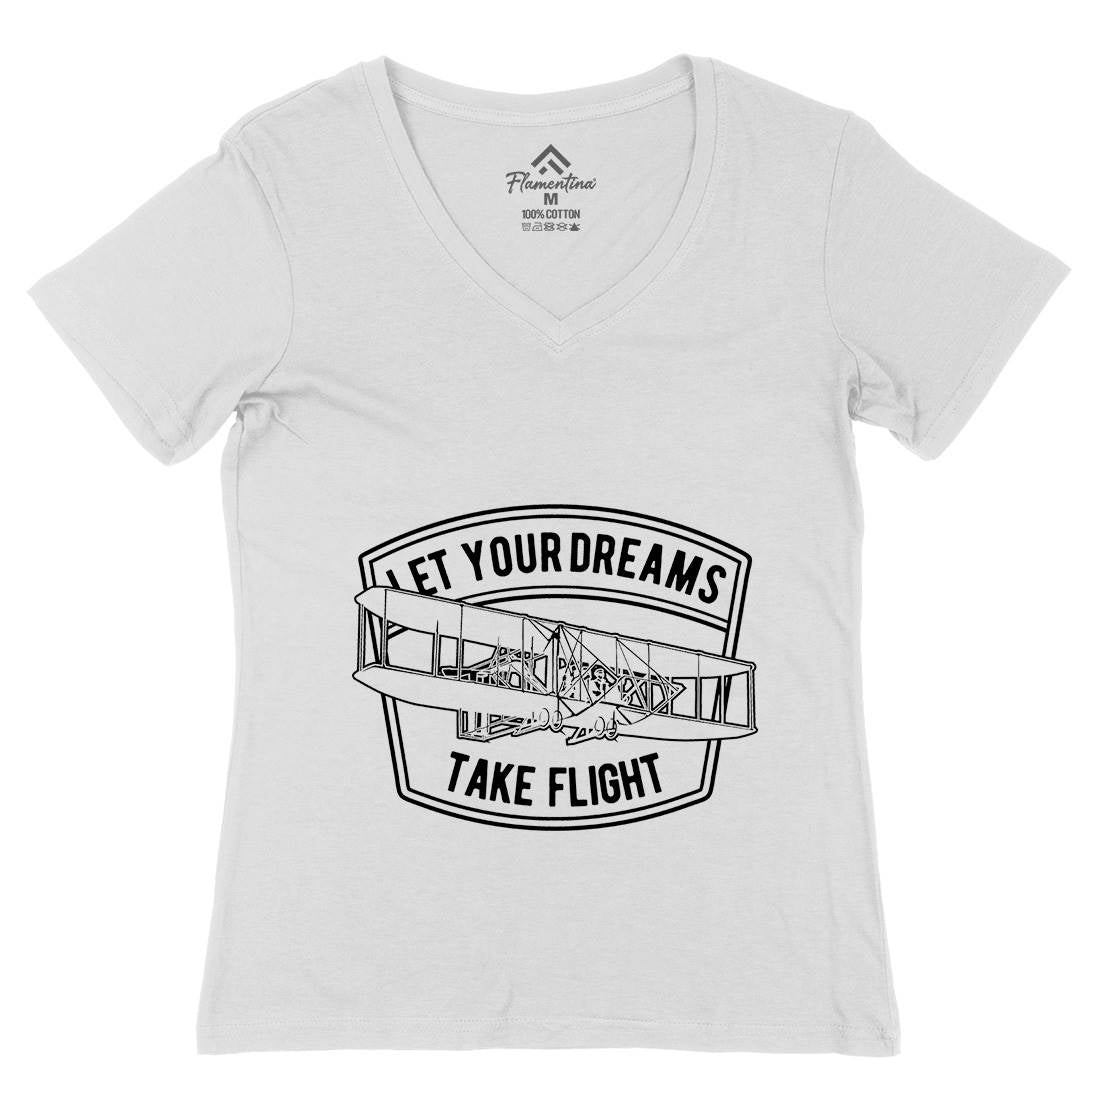 Let Your Dreams Womens Organic V-Neck T-Shirt Vehicles A706